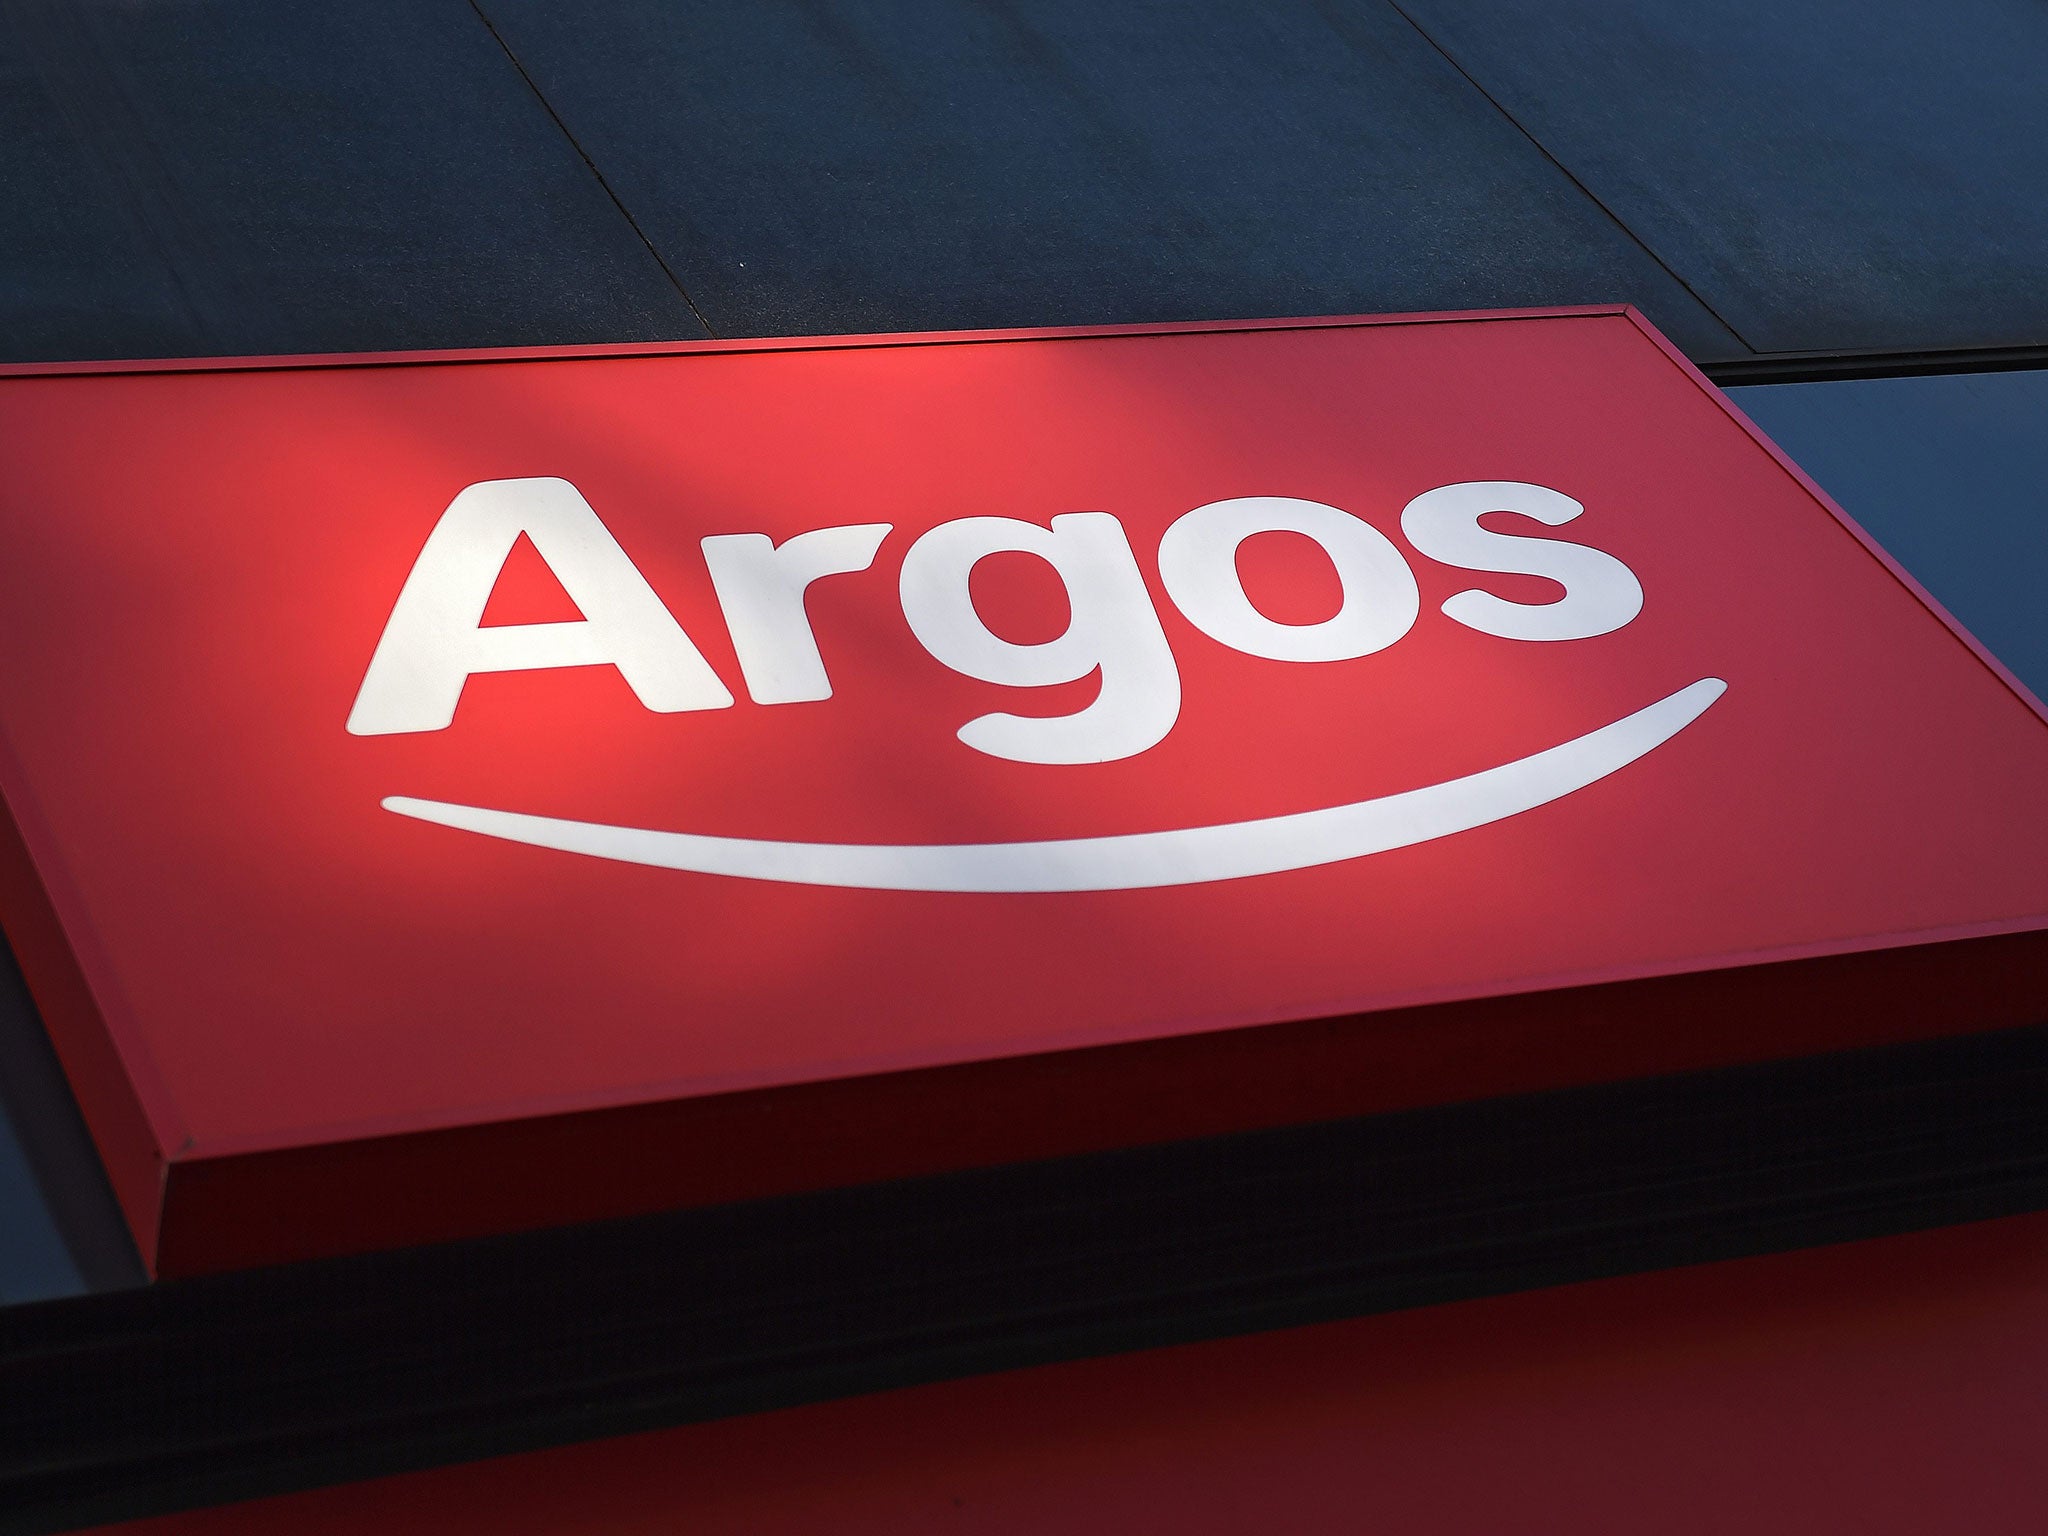 Argos said in a statement: “We do not tolerate discrimination and fully comply with the Disability Discrimination Act.”